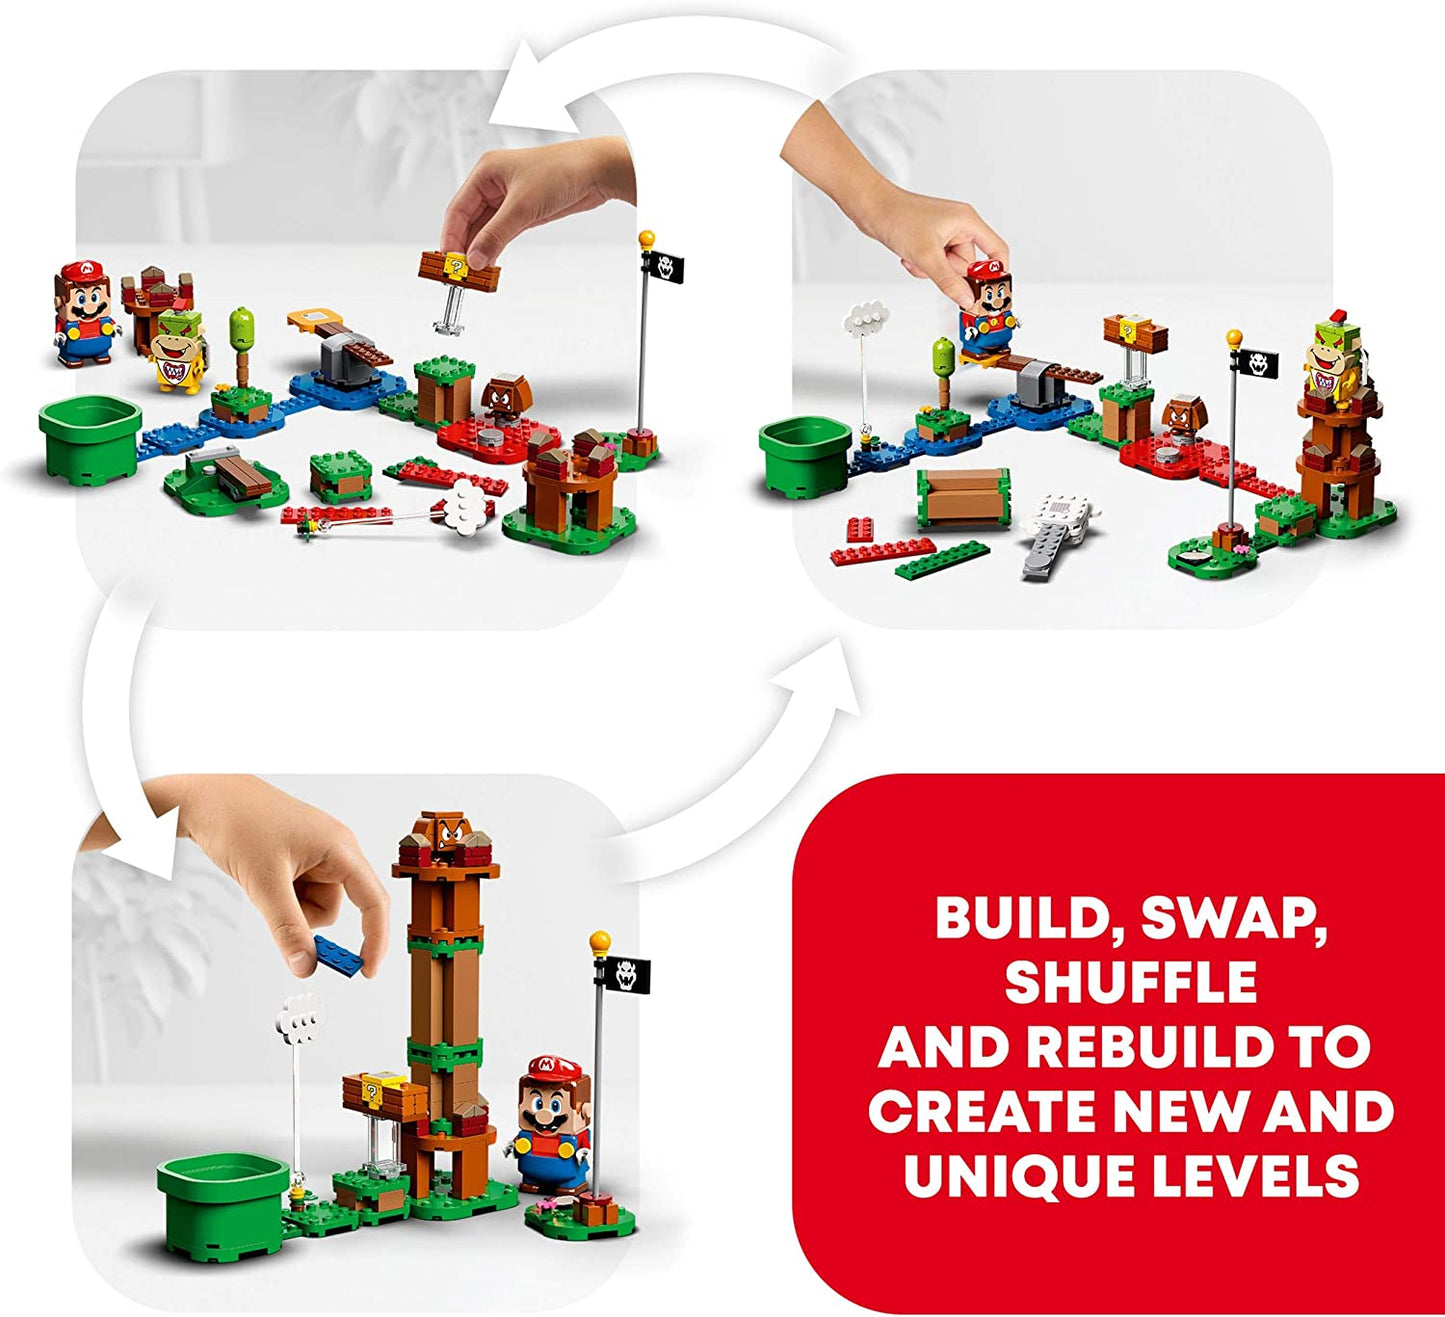 LEGO 71360 Super Mario Adventures Starter Course Set, Buildable Toy Game, Collectible Gifts for Kids, Boys & Girls 6 plus Year Old with Interactive Figure - FoxMart™️ - 6 years and up